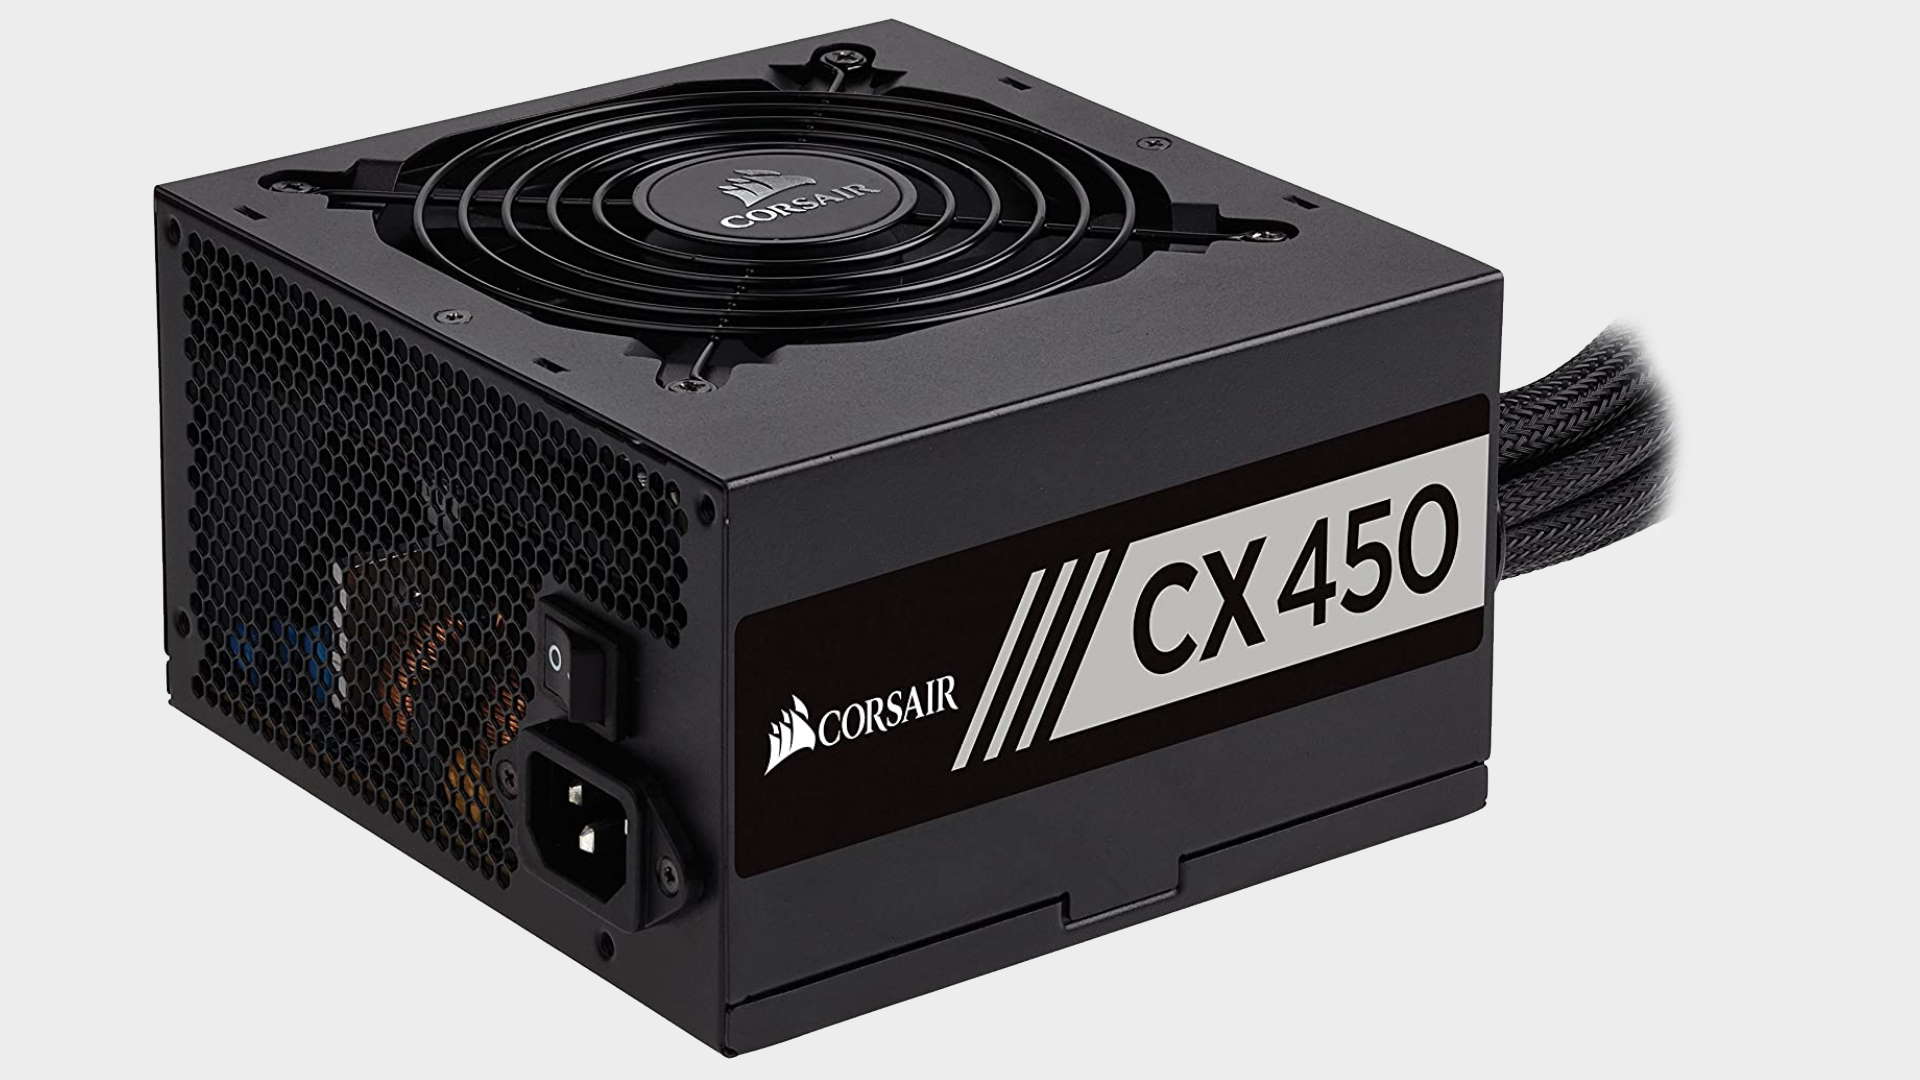 Image of the Corsair CX450 power supply on a grey background.